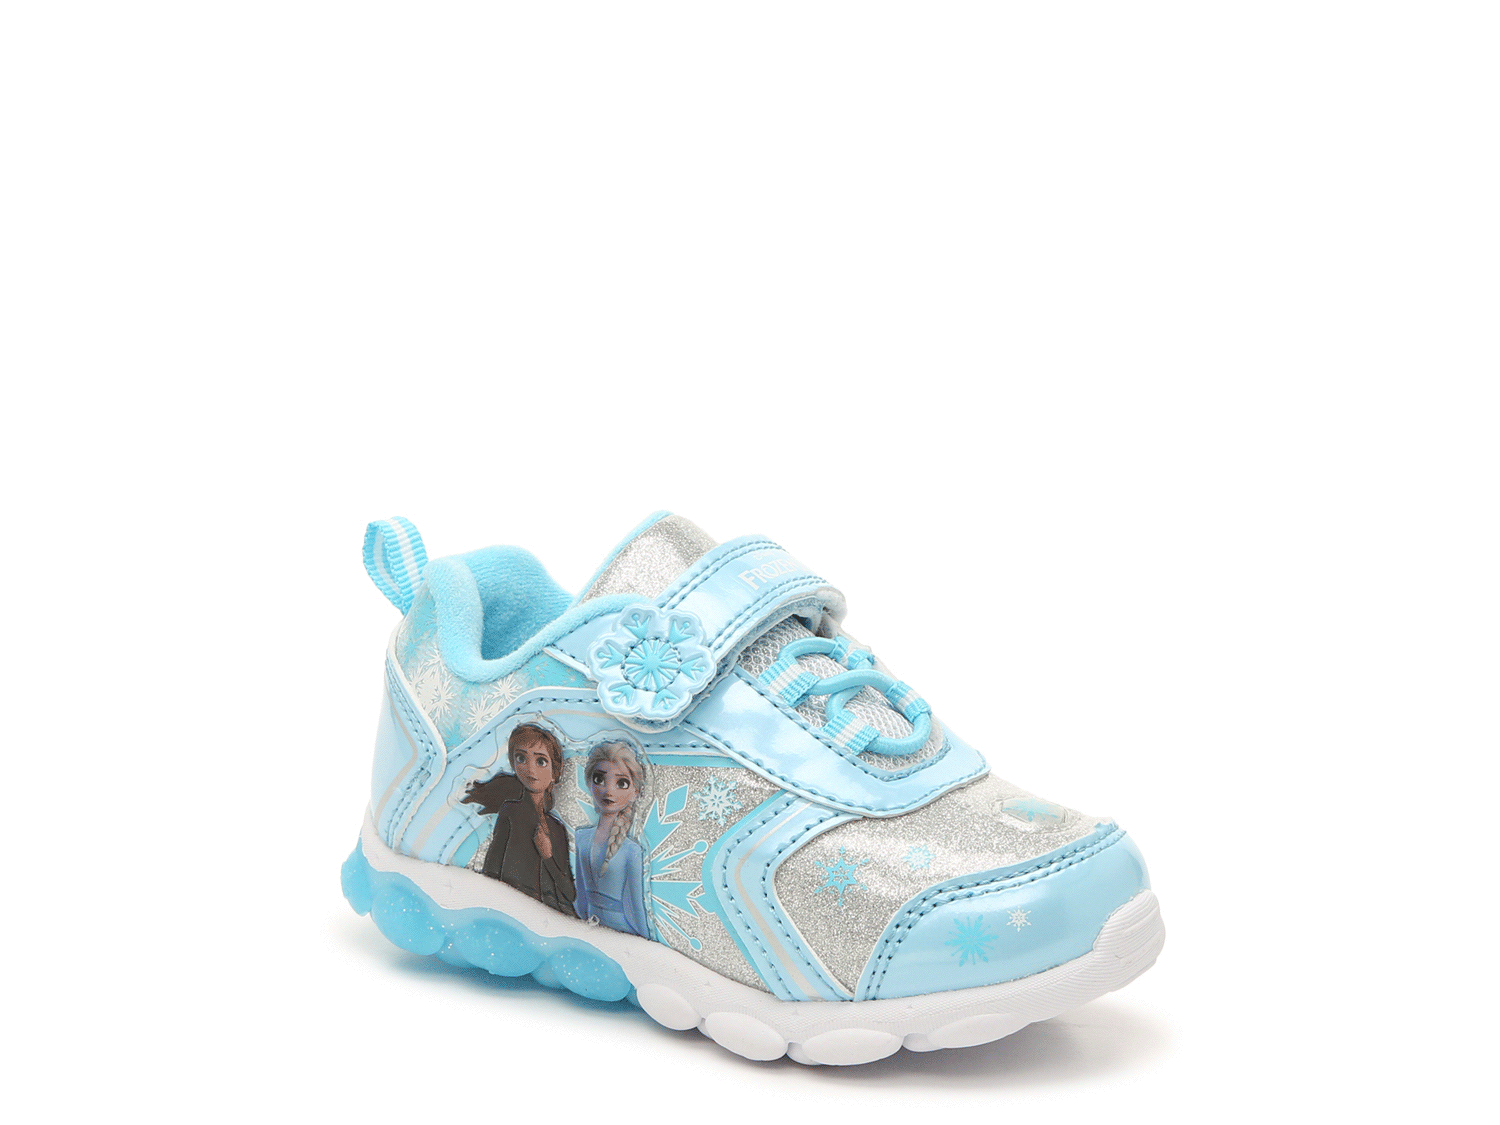 kids light up trainers